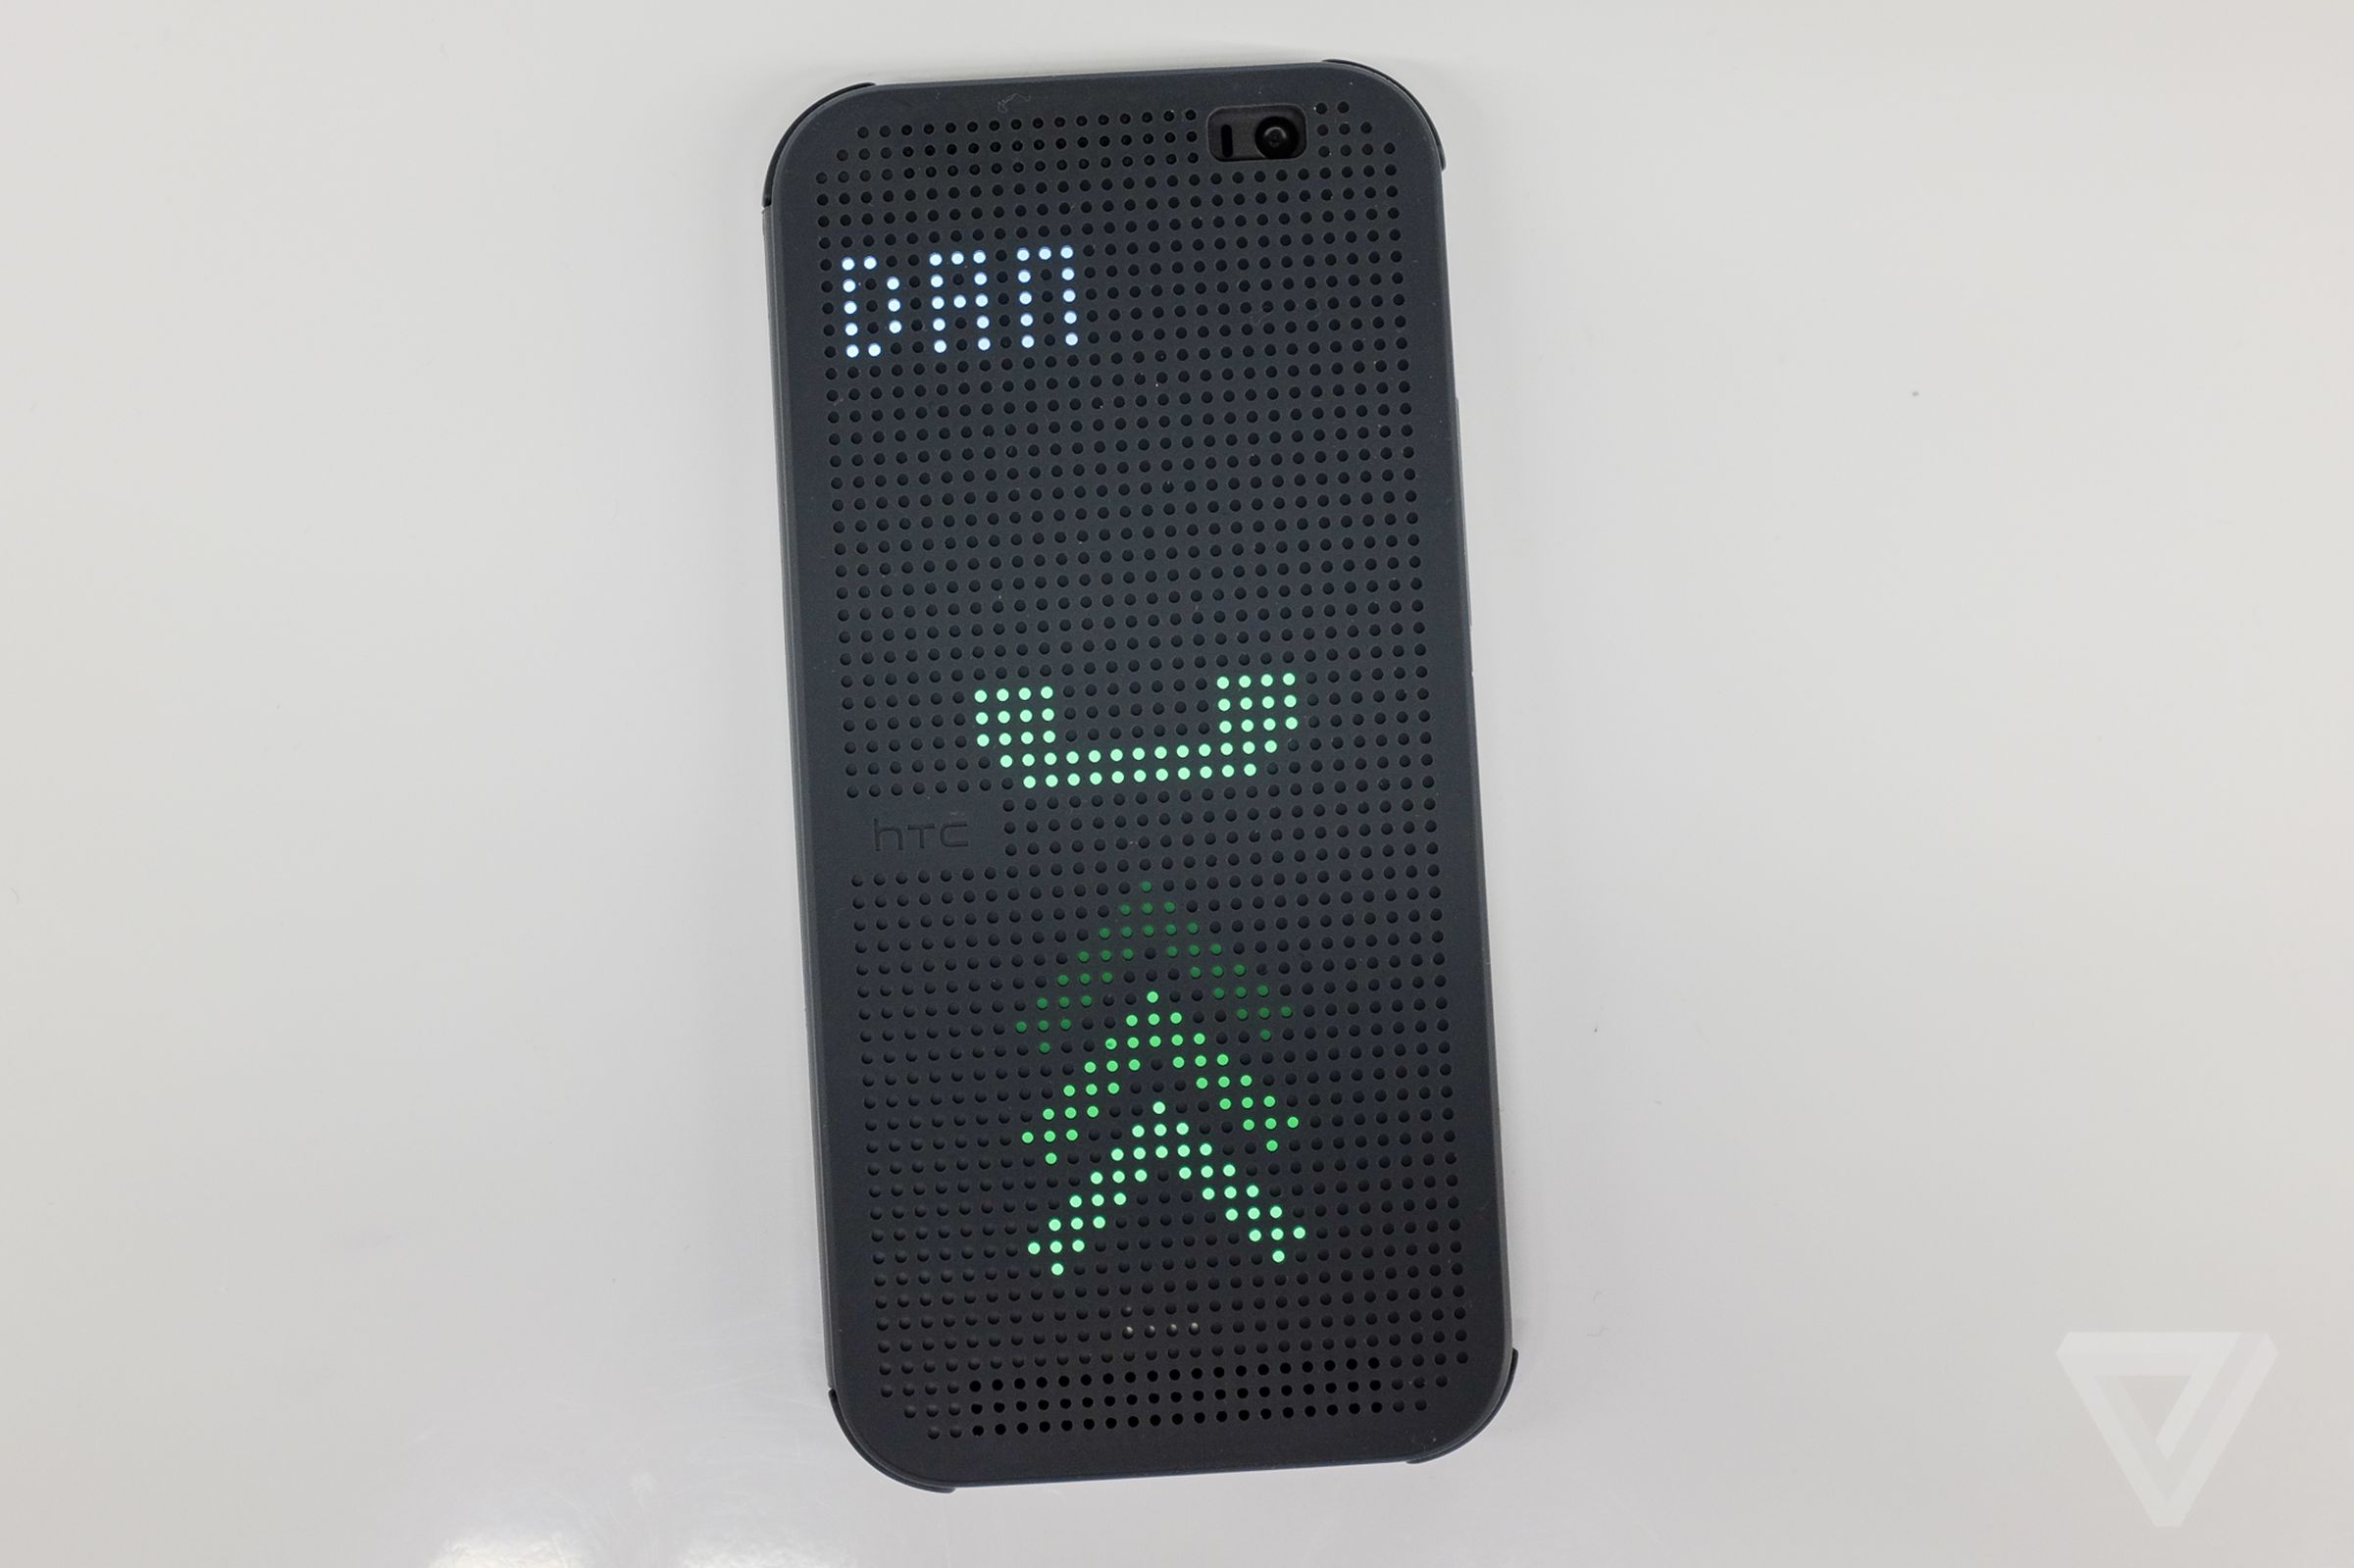 HTC Dot View case for the One